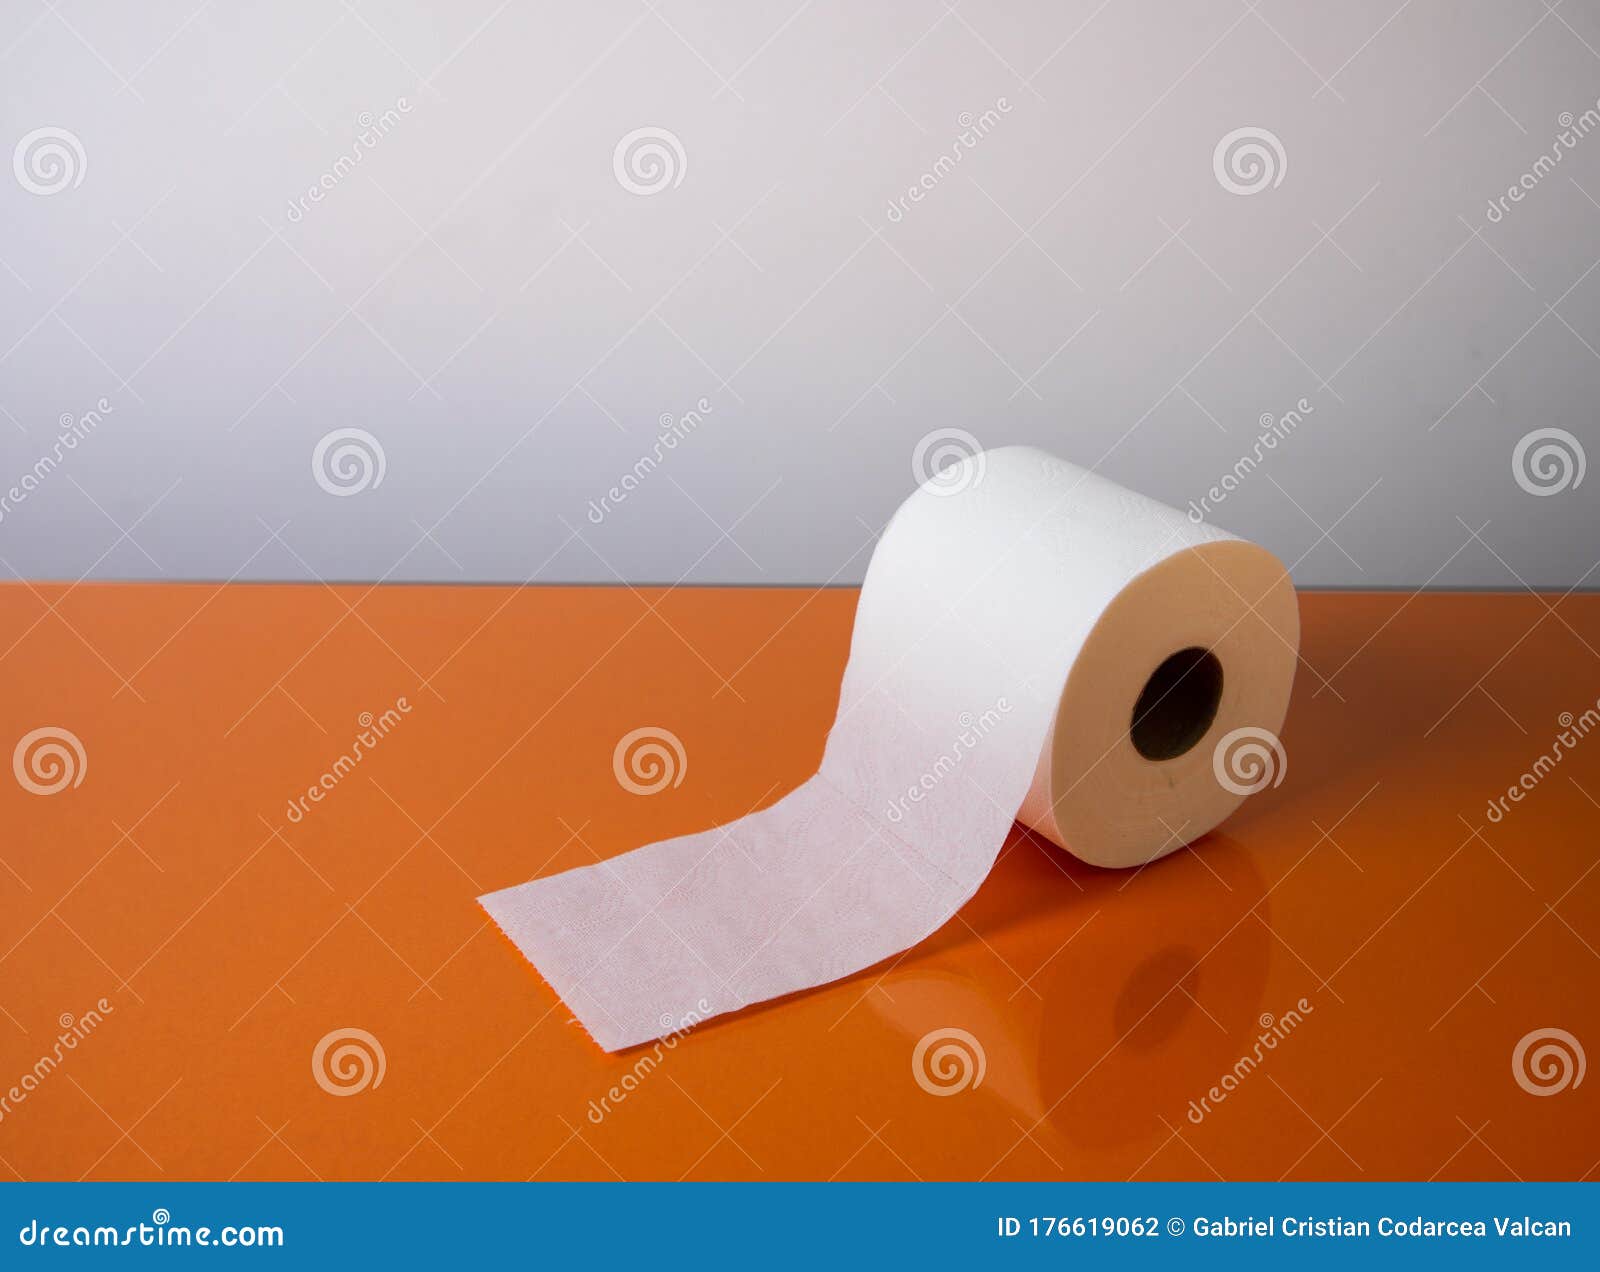 view of a white toilet paper roll over an orange background